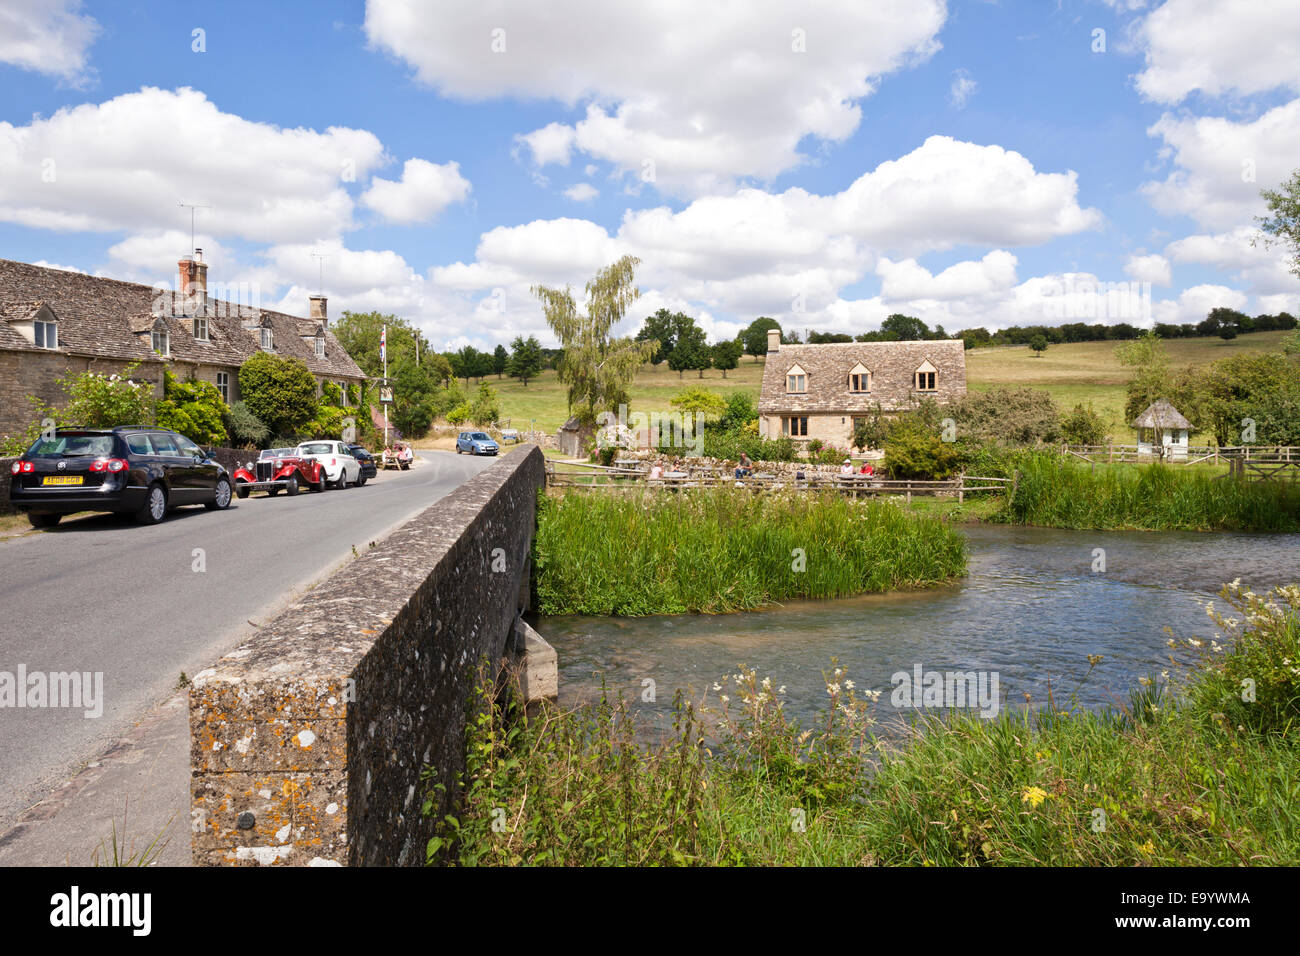 The Swan Inn on the banks of the River Windrush in the Cotswold village of Swinbrook, Oxfordshire UK Stock Photo